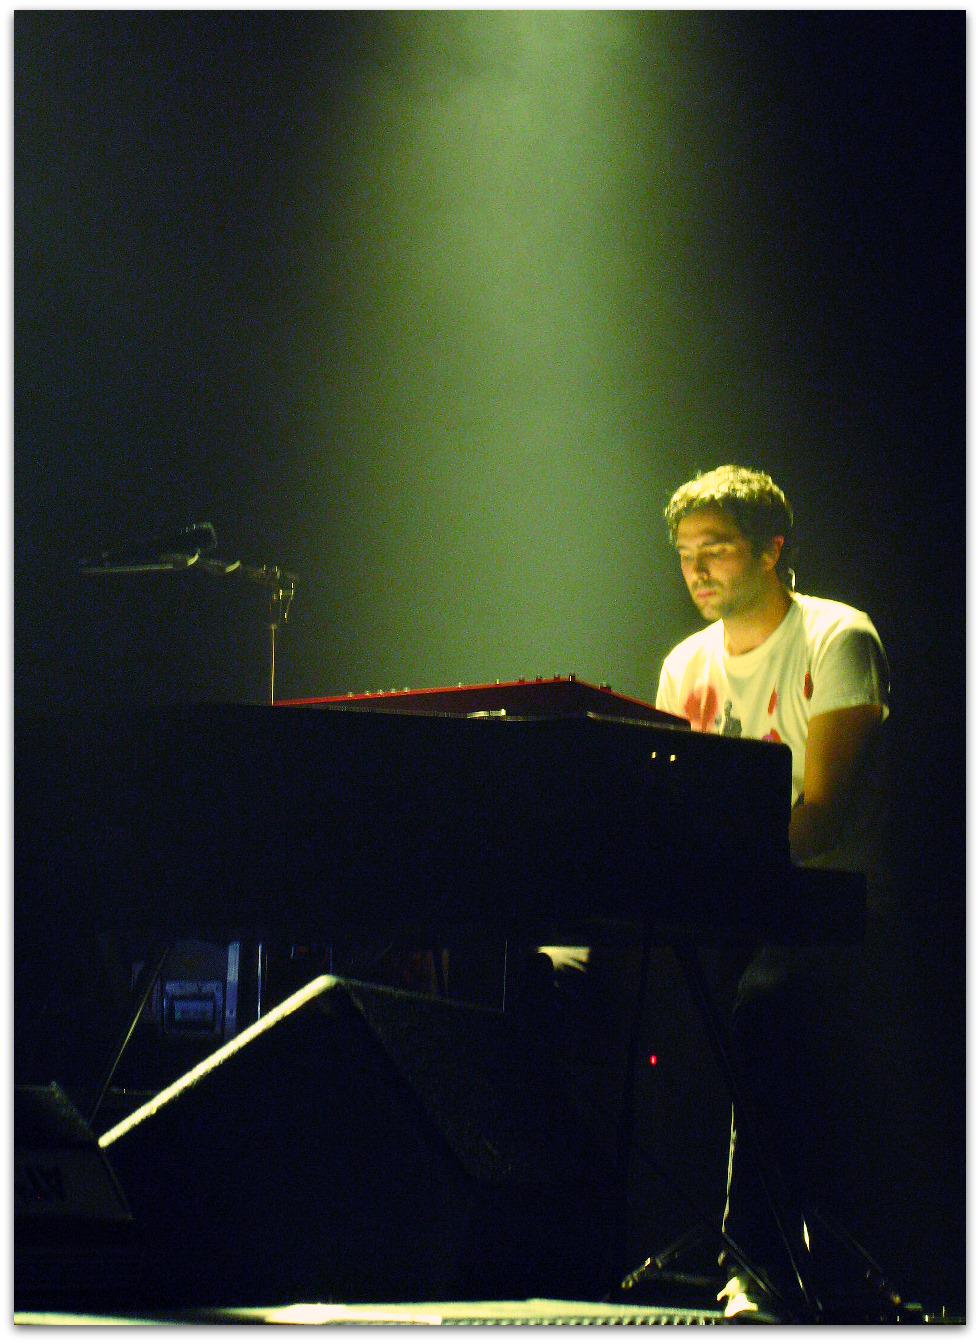 Happy Birthday Mr.Tim Rice-Oxley! We\re hoping you resurface soon with another dash of brilliance. 